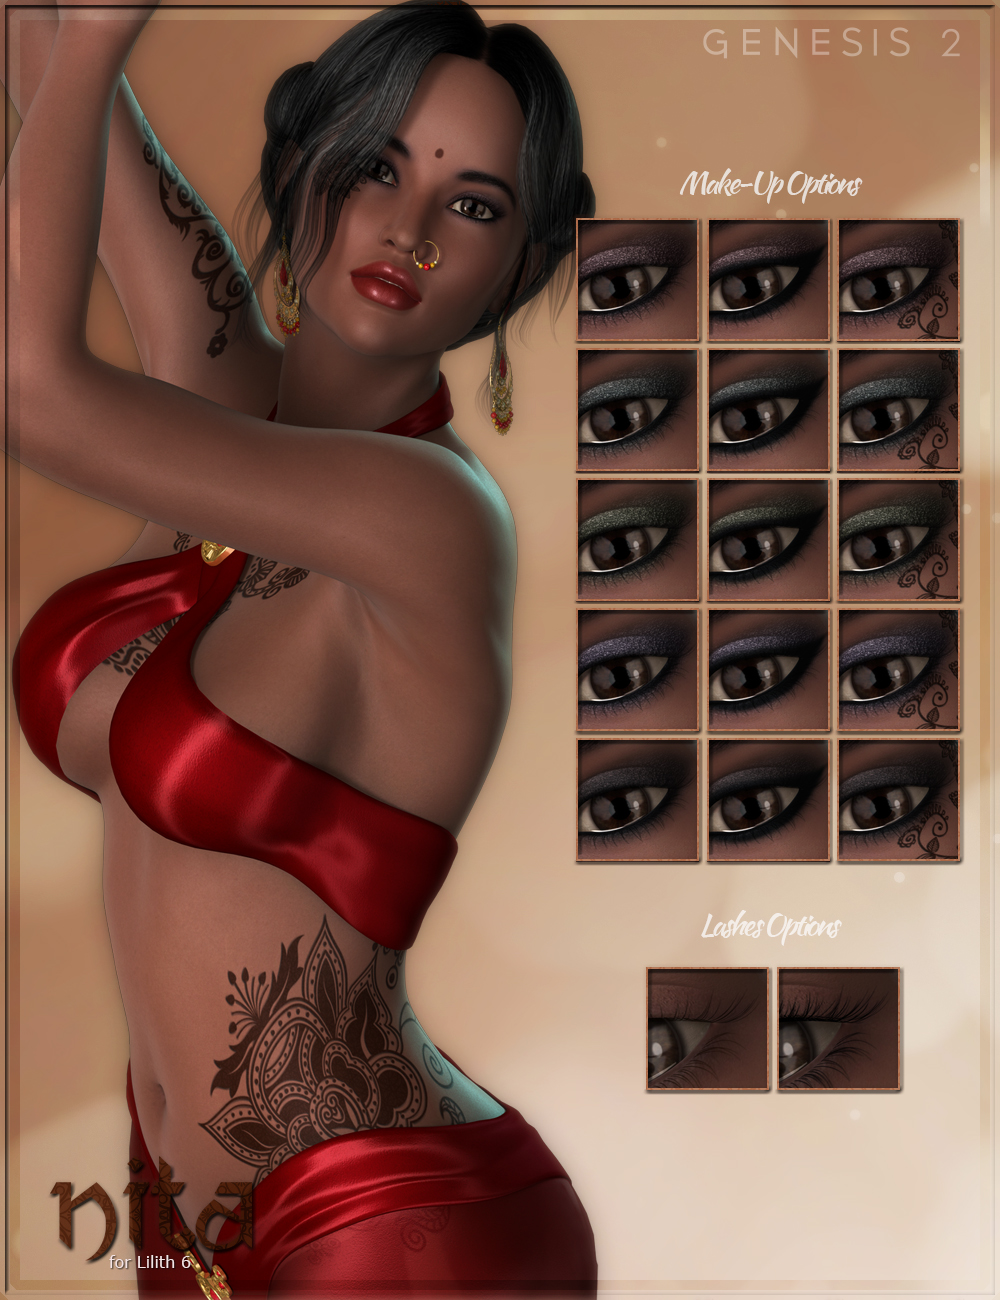 FW Nita for Lilith 6 by: Fred Winkler Art, 3D Models by Daz 3D